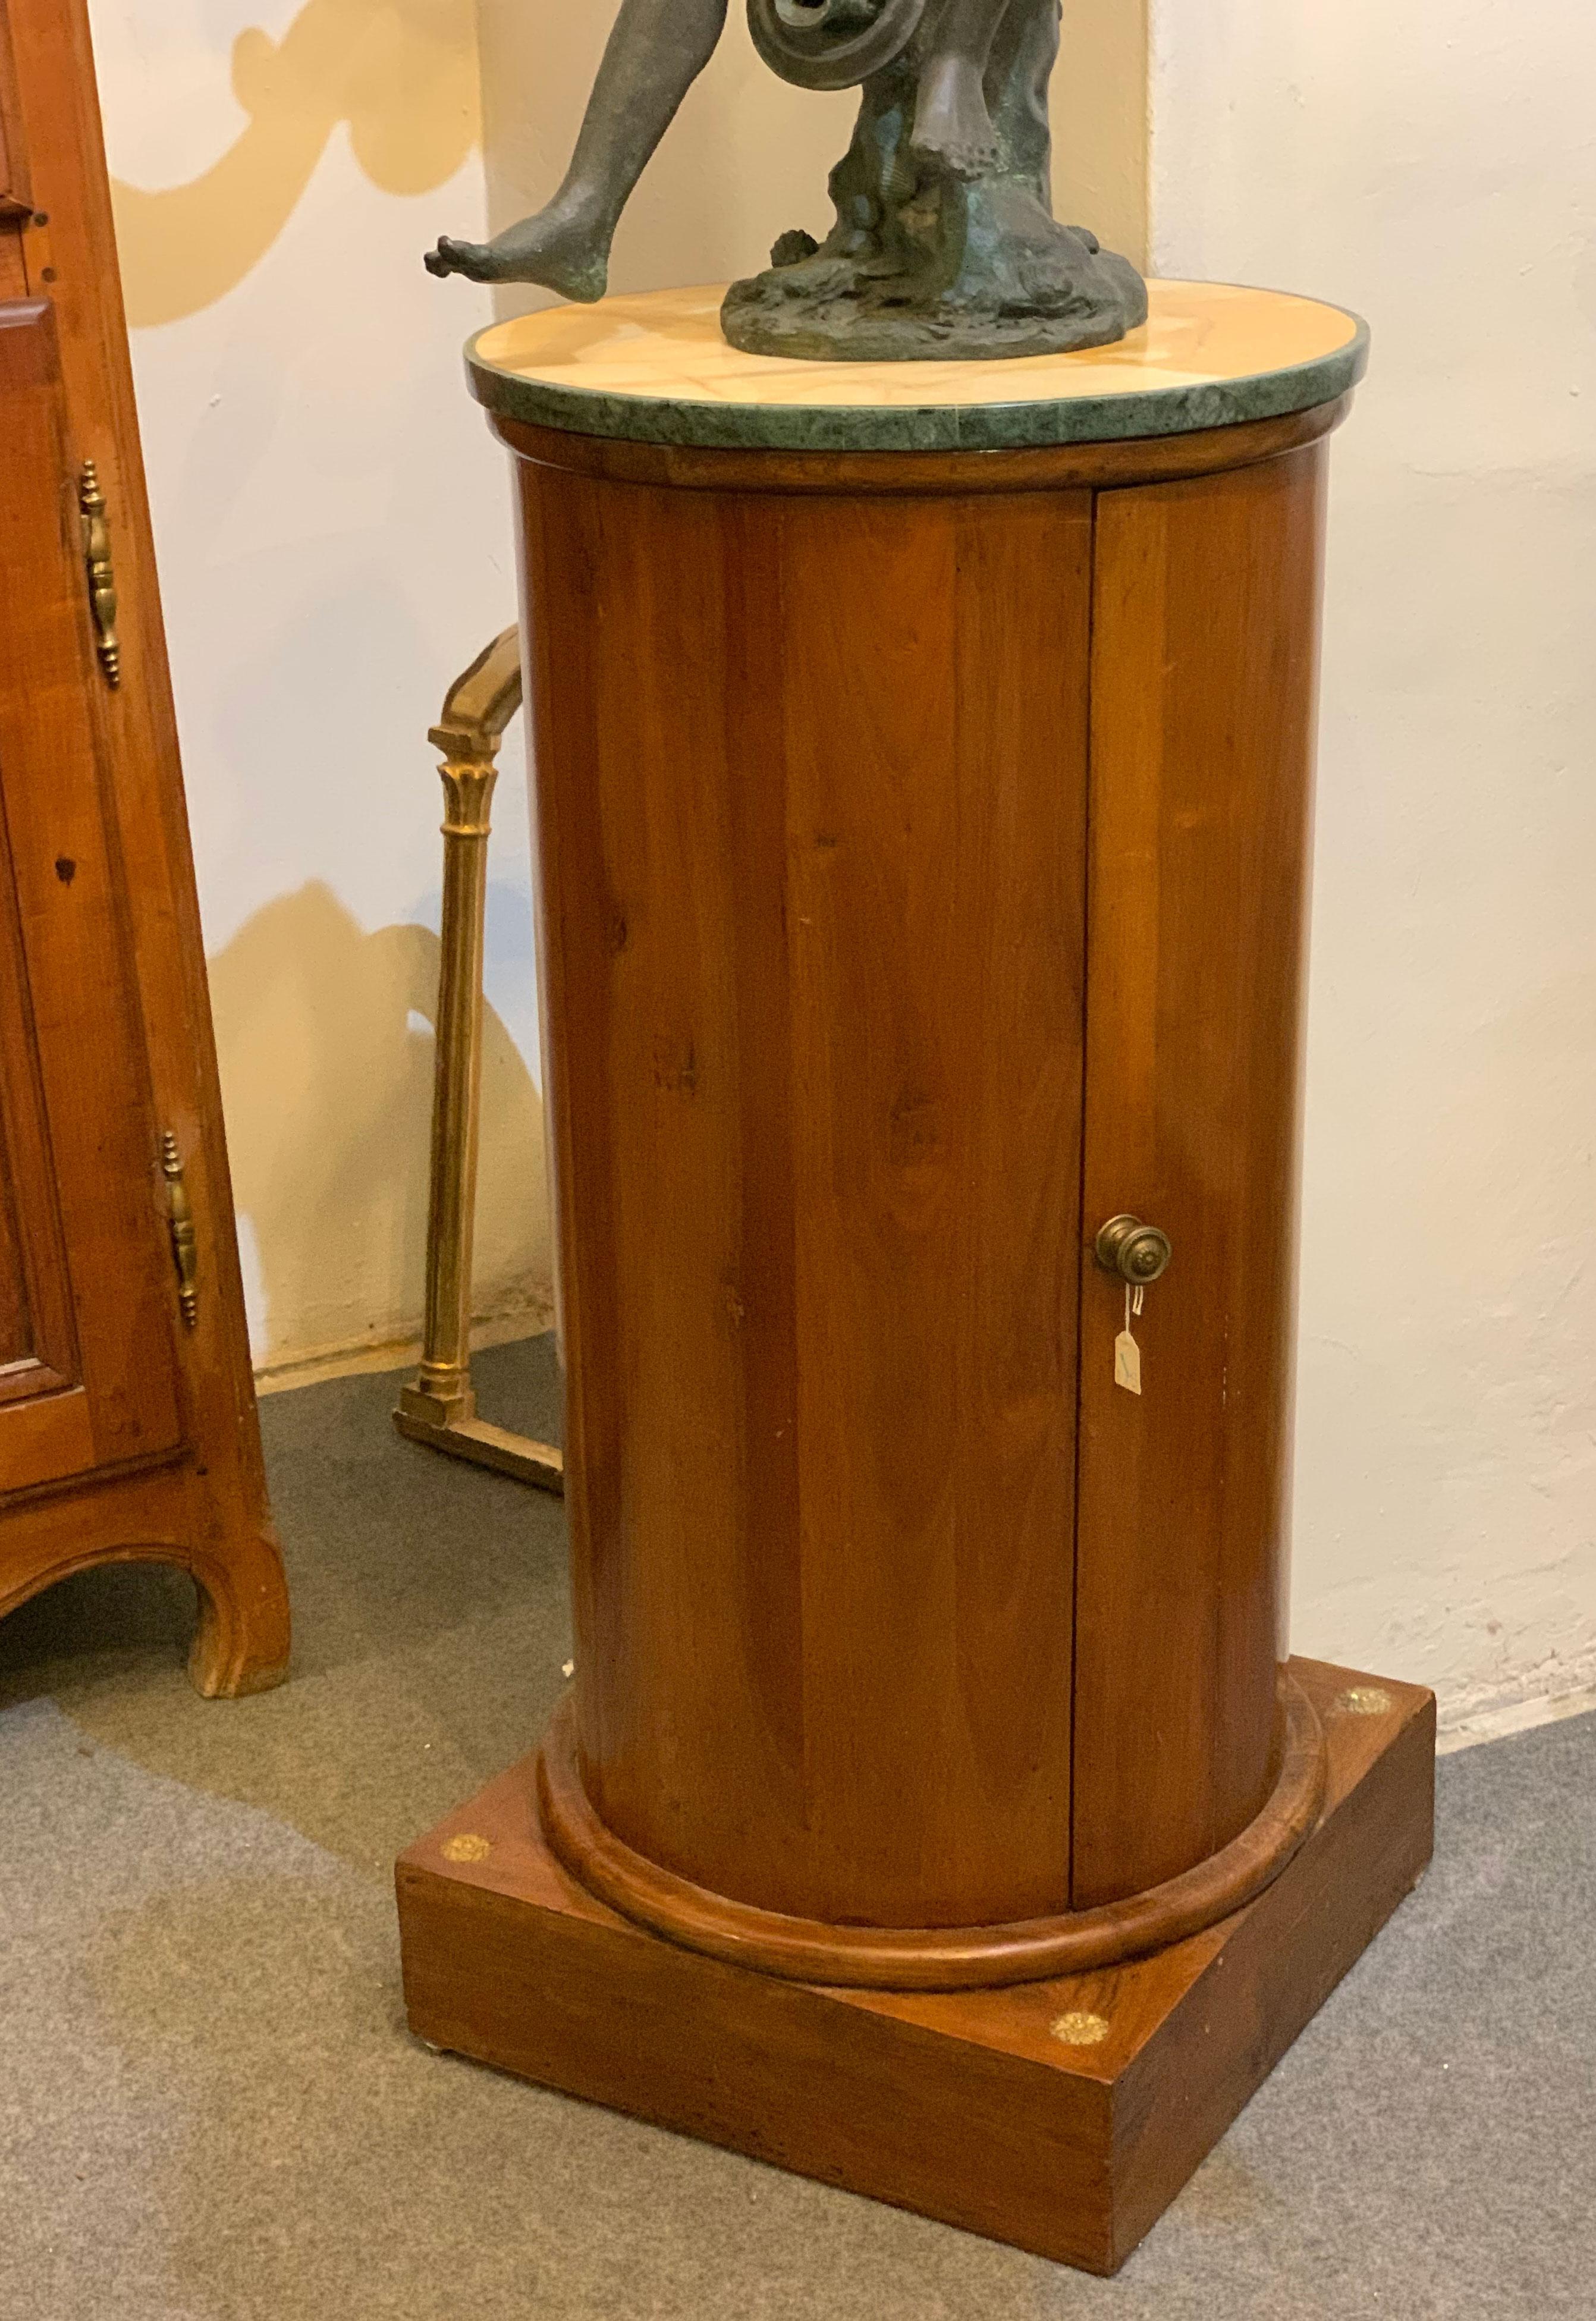 Elegant circular column on a square plinth. The column is entirely veneered in walnut, with the top in yellow Siena marble and the edge in green Prato marble. The piece of furniture has both the function of supporting an object or a lamp and as a